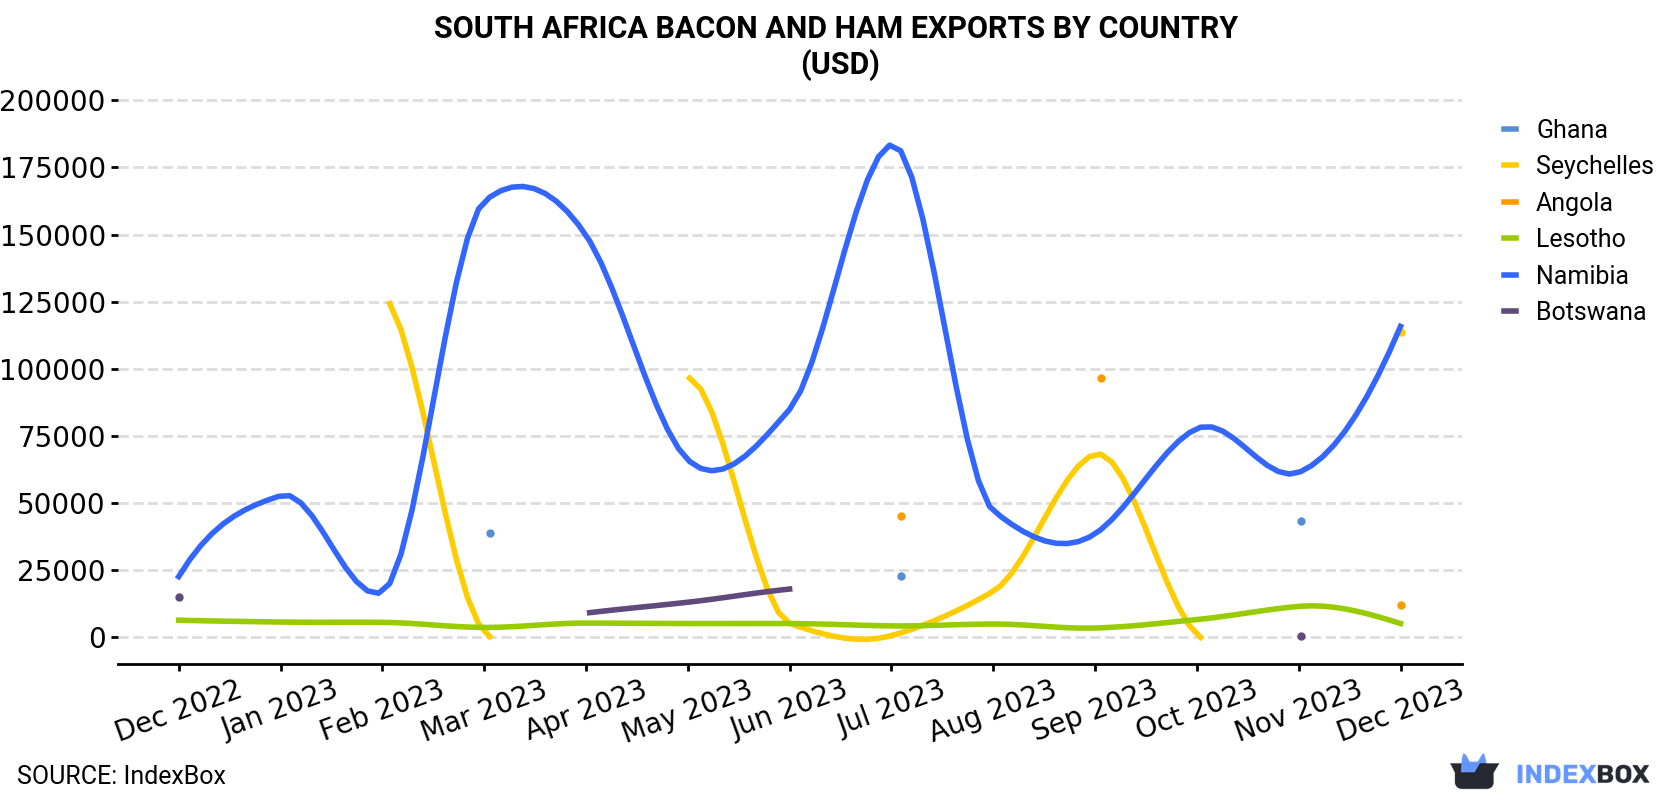 South Africa Bacon And Ham Exports By Country (USD)